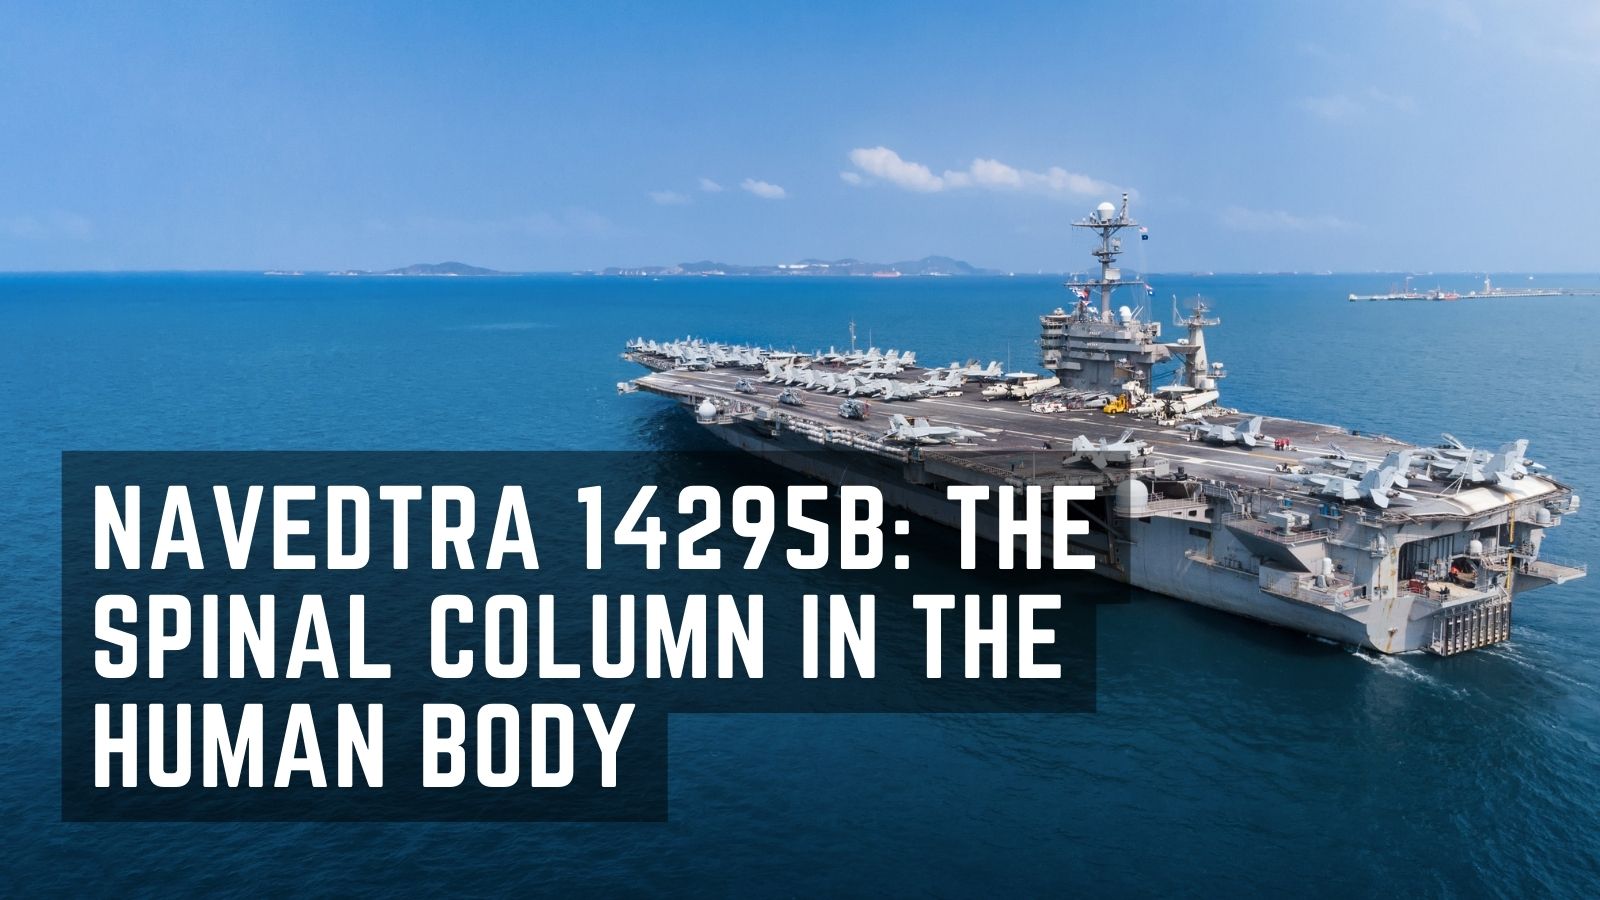 Navedtra 14295B uthe spinal column in the human body - militaryguidecentral.com